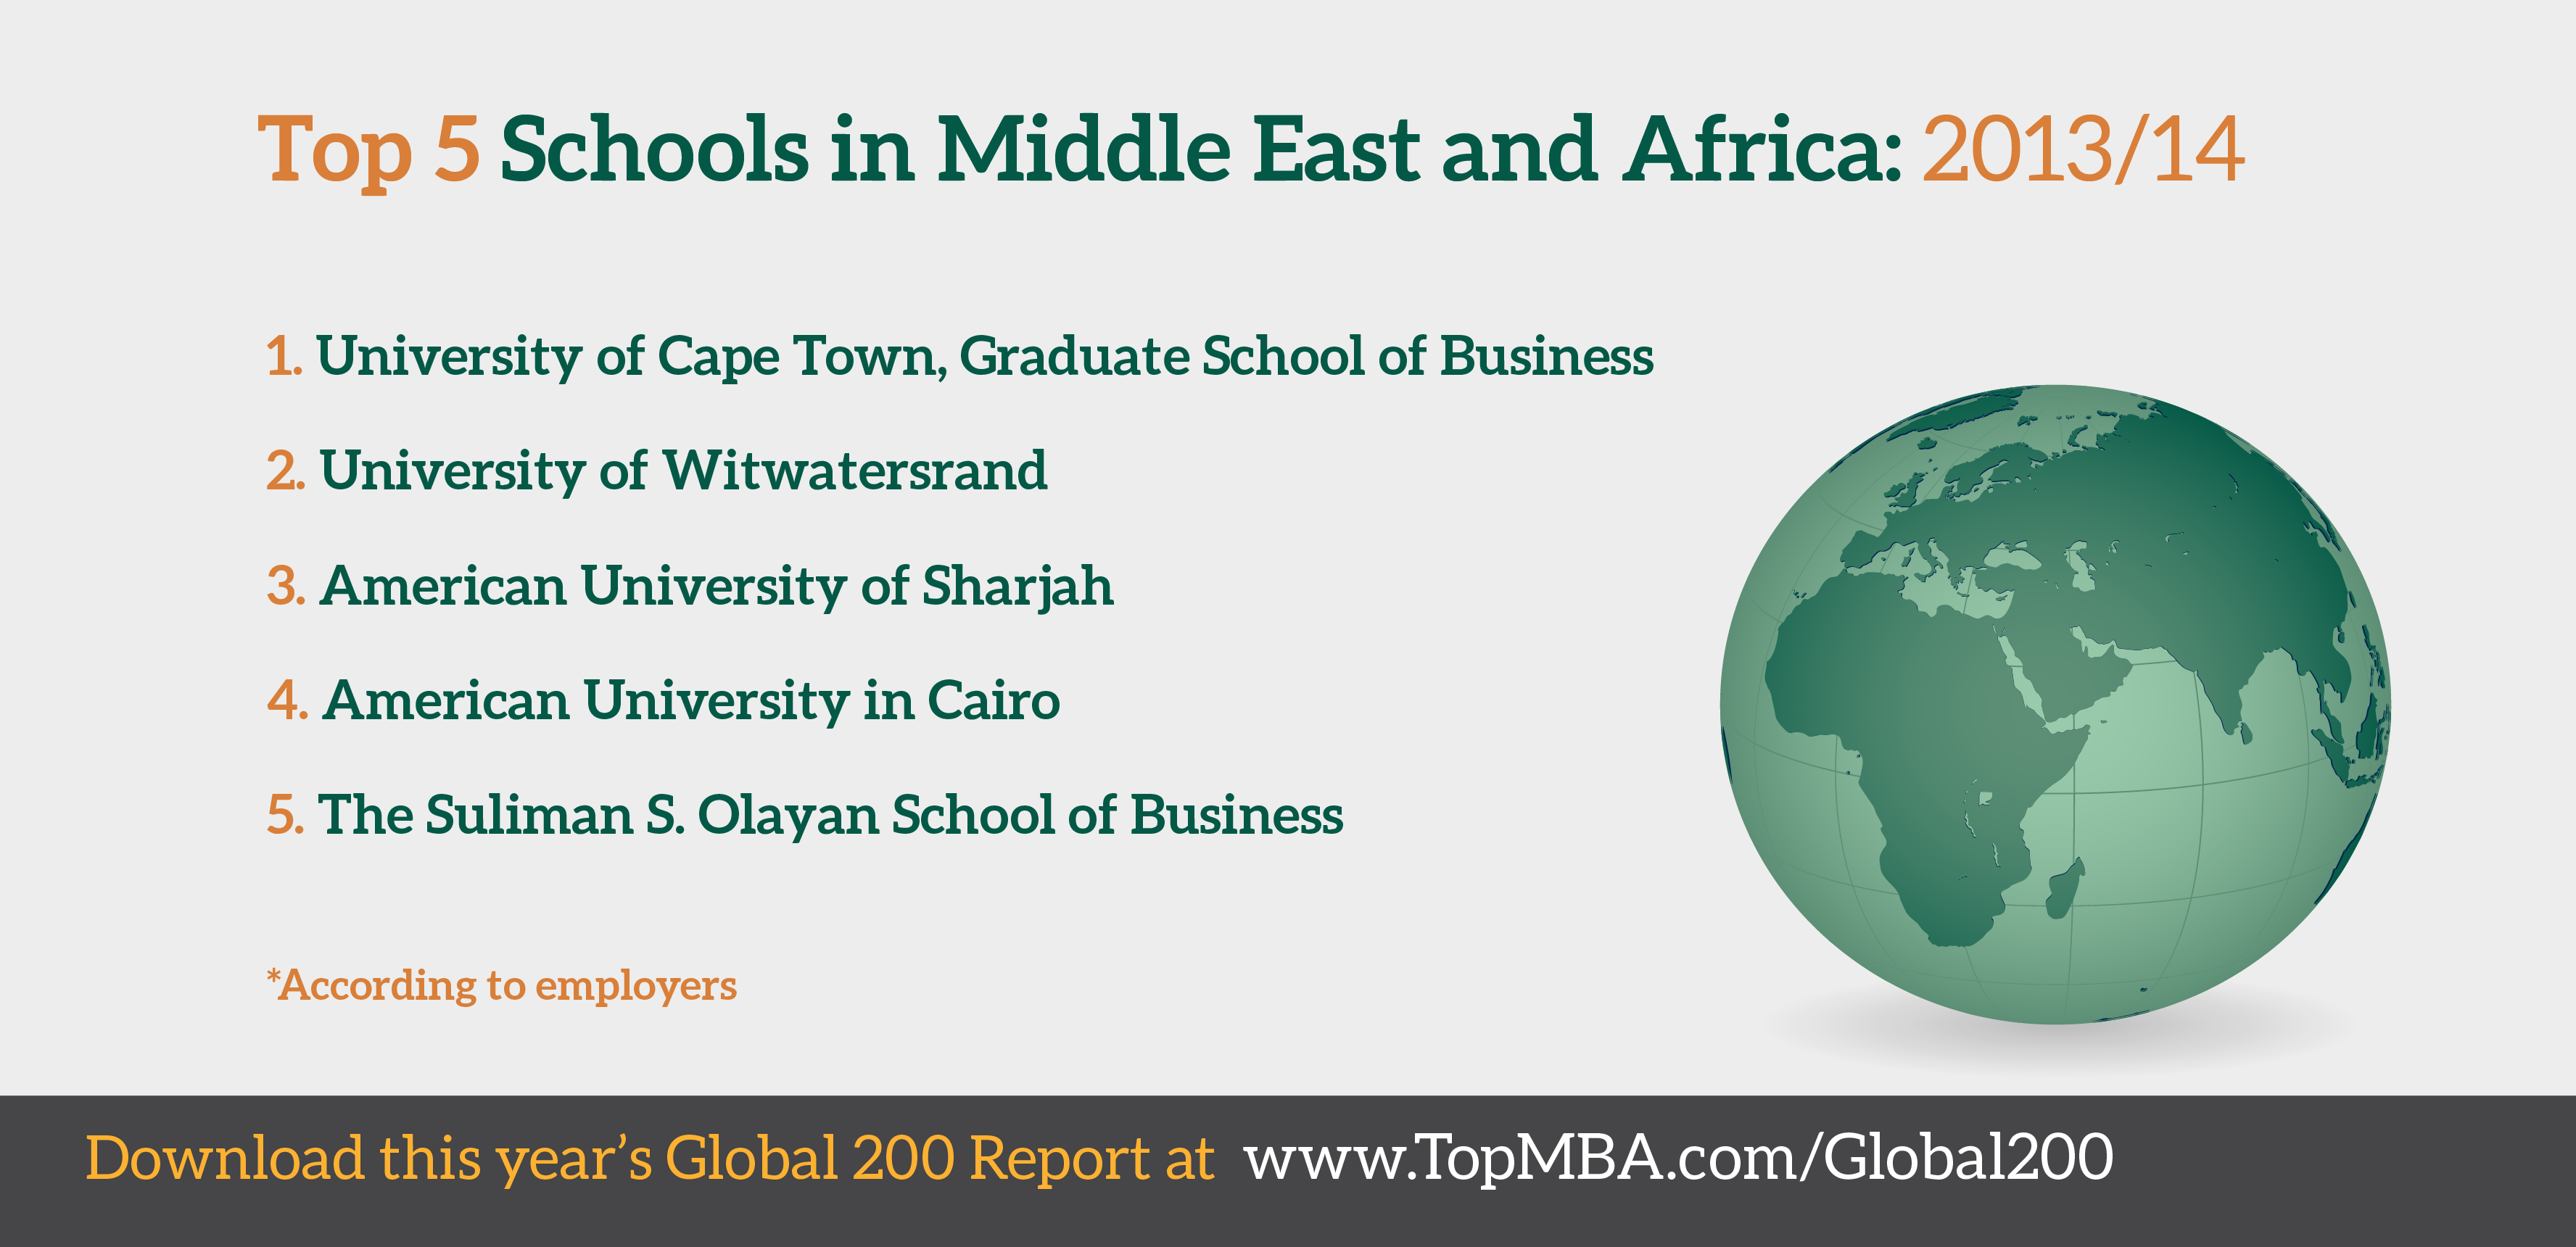 Top Business Schools in Africa & the Middle East | TopMBA.com